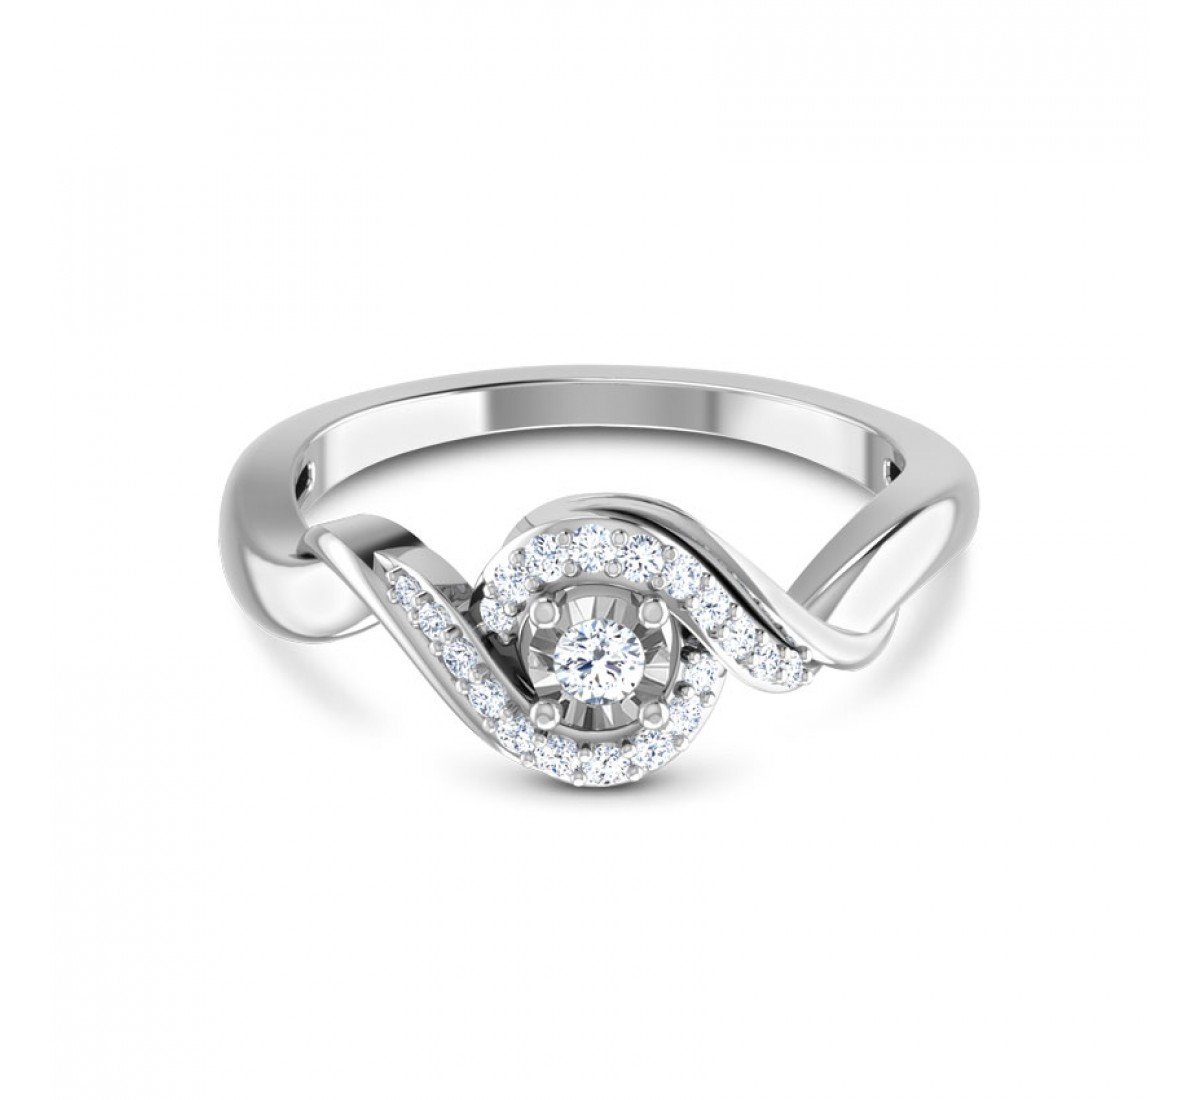 Entwined Floret Diamond Ring